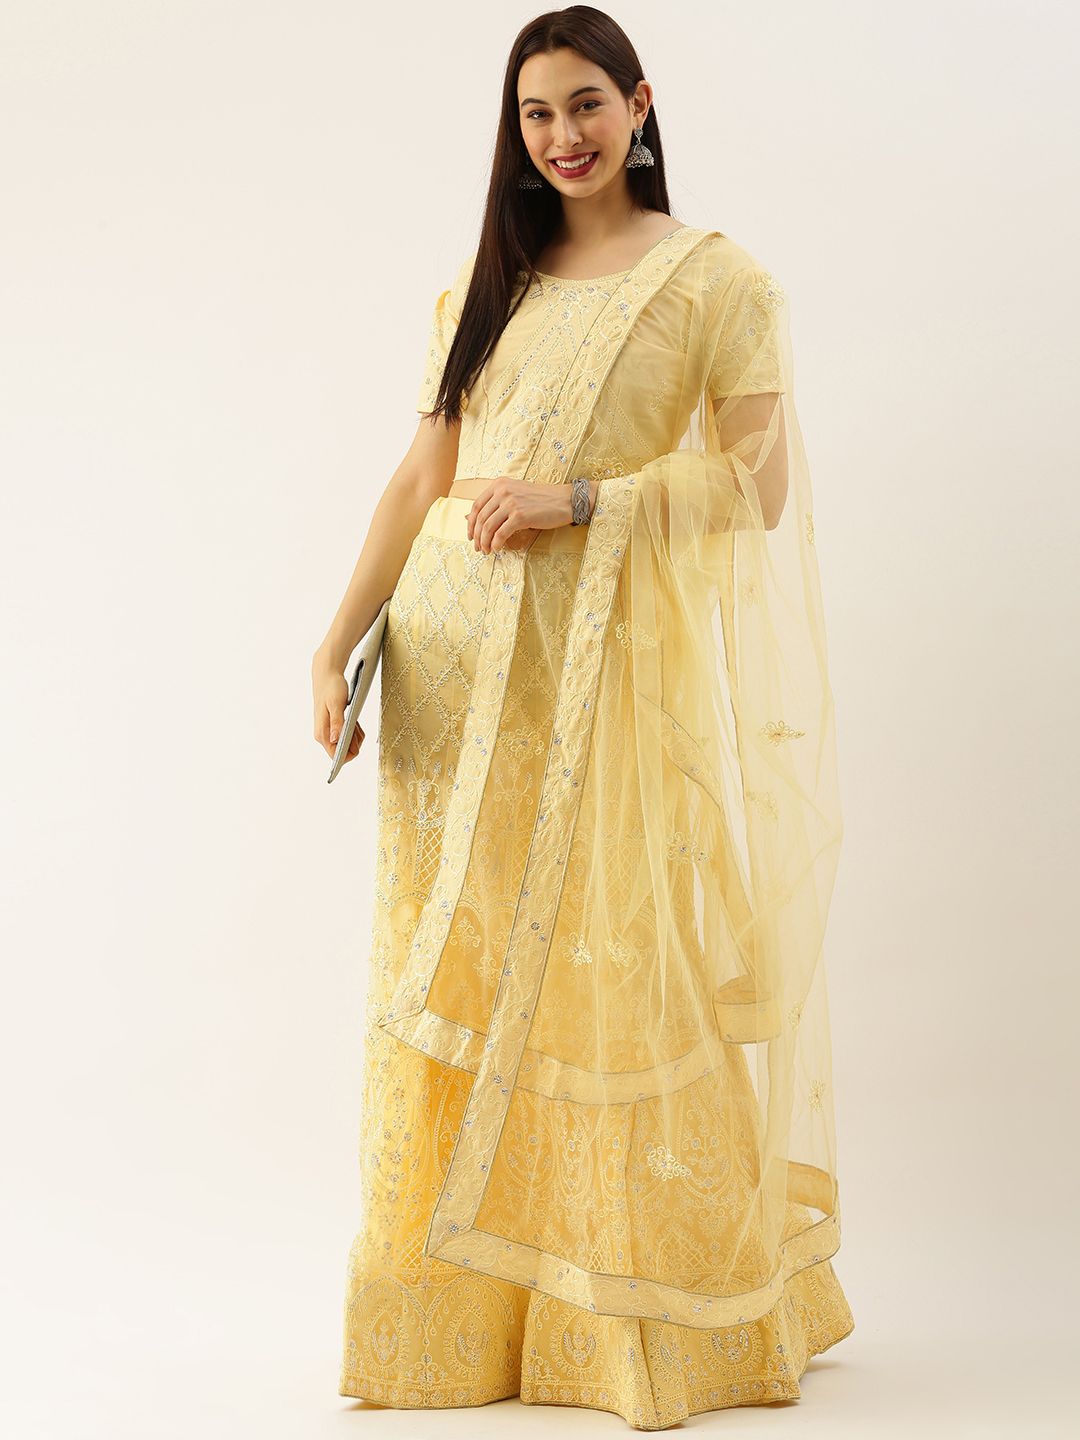 LADUSAA Yellow Embroidered Semi-Stitched Lehenga & Unstitched Blouse With Dupatta Price in India